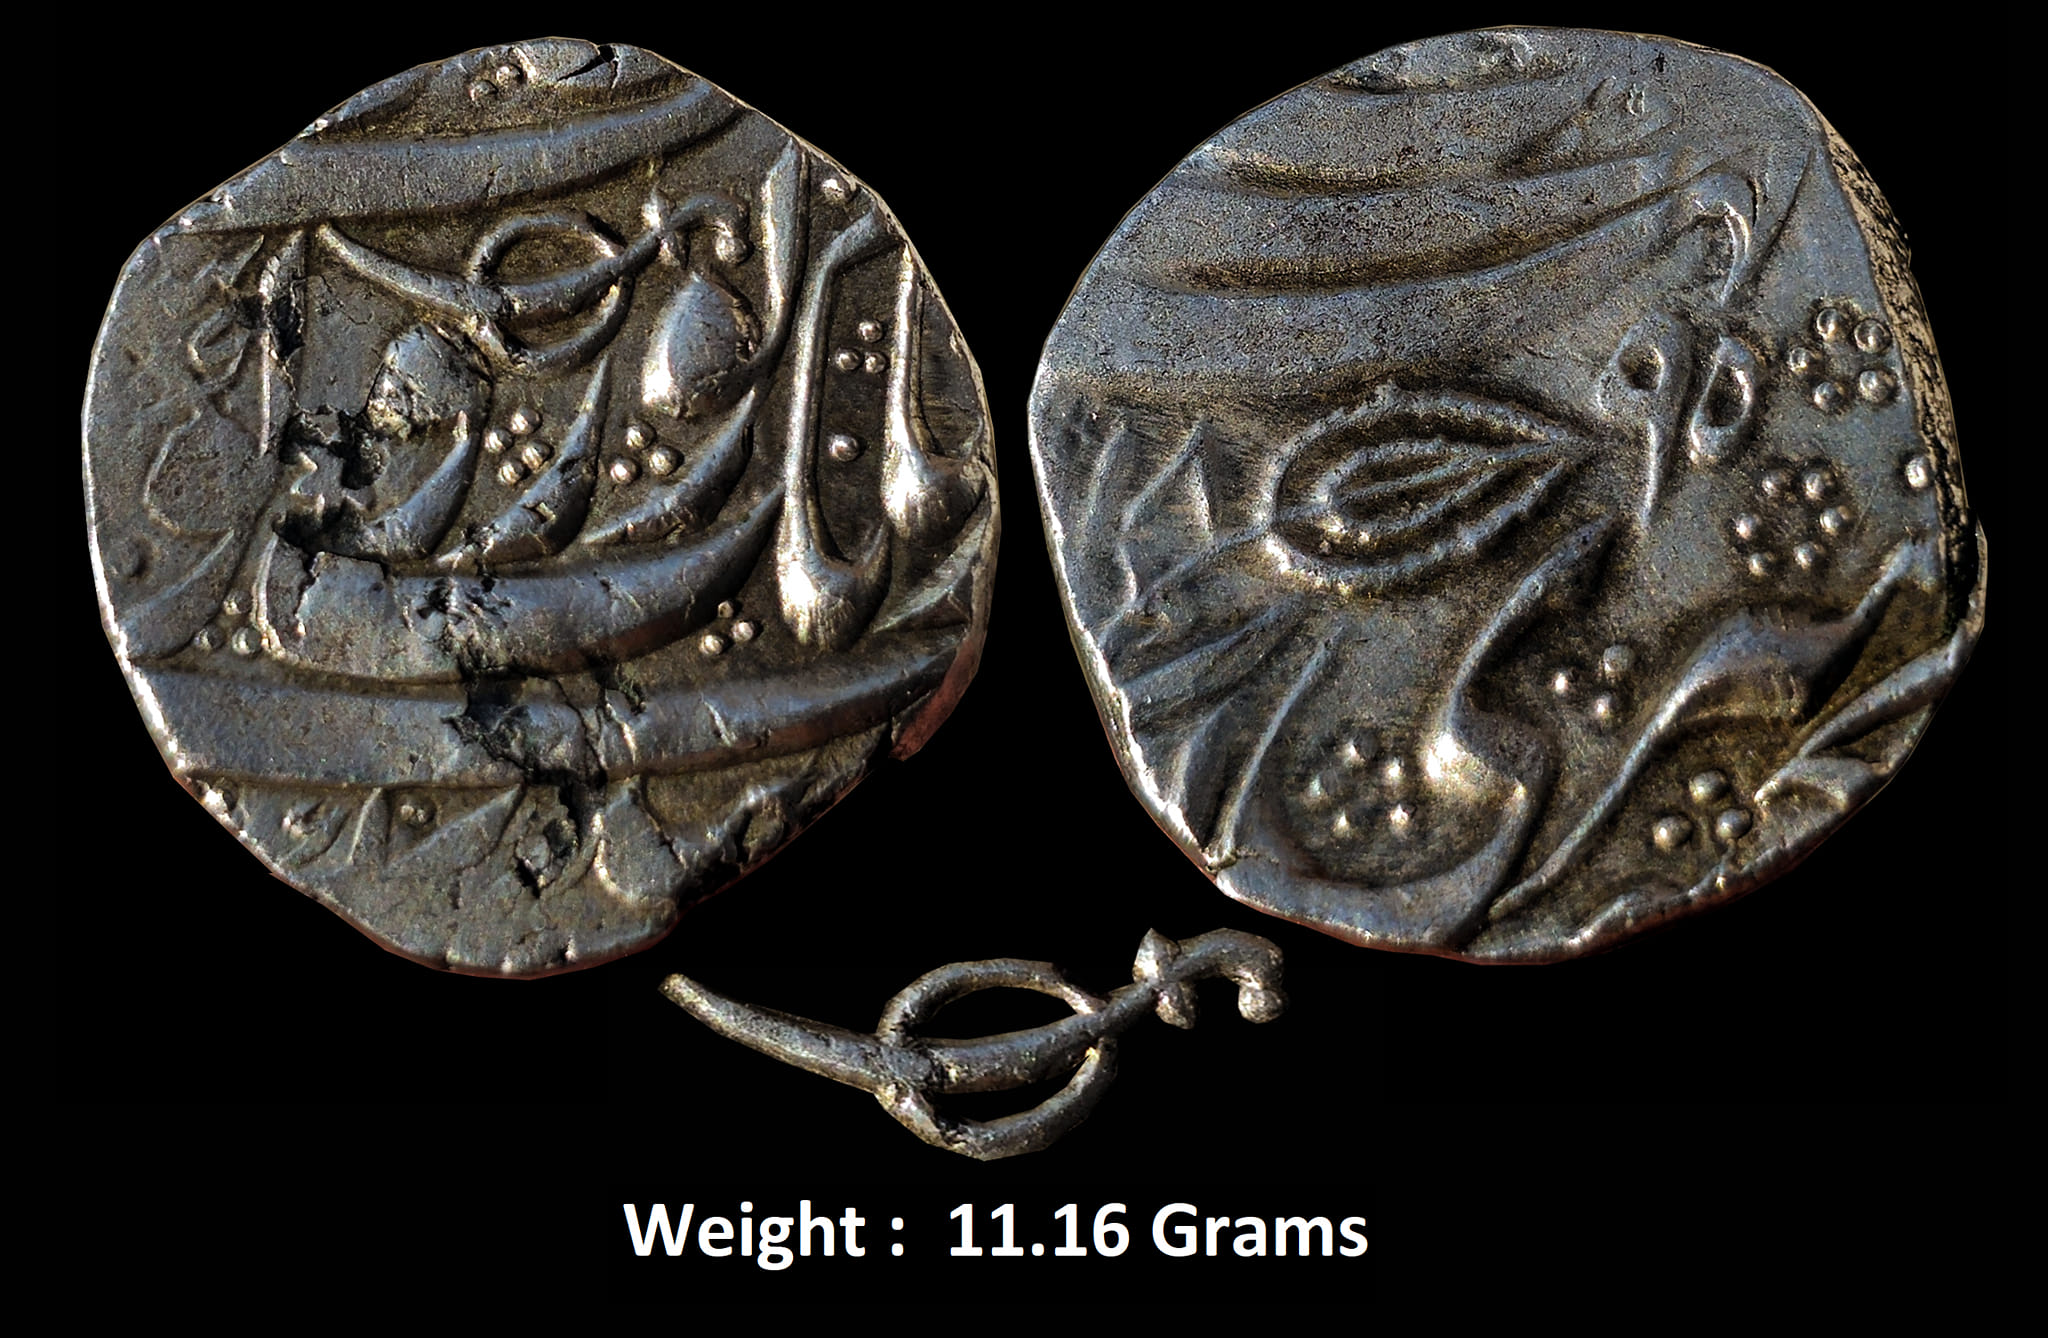 Independent Kingdom ; Sikh Empire , Silver Rupee ; Kashmir mint ; 1895 VS ;
Governor Mihan Singh Kumedan ;
Note : Silver rupee with a sword and shield symbol on the obverse and a leaf on the reverse. The sword and shield symbol represents Governor Mihan Singh,
Inscription: Gobindshahi couplet.

Obv : (in Persian) Deg o tegh o fath o nusrat bedrang Yaft az Nanak Guru Gobind Singh Translation: Abundance, power and victory [and] assistance without delay are the gift of Nanak [and] Guru Gobind Singh.
Rev : (in Persian) Zarb Kashmir Sri Akal Pur Jib Translation: Struck in Kashmir, in the city of the timeless One.